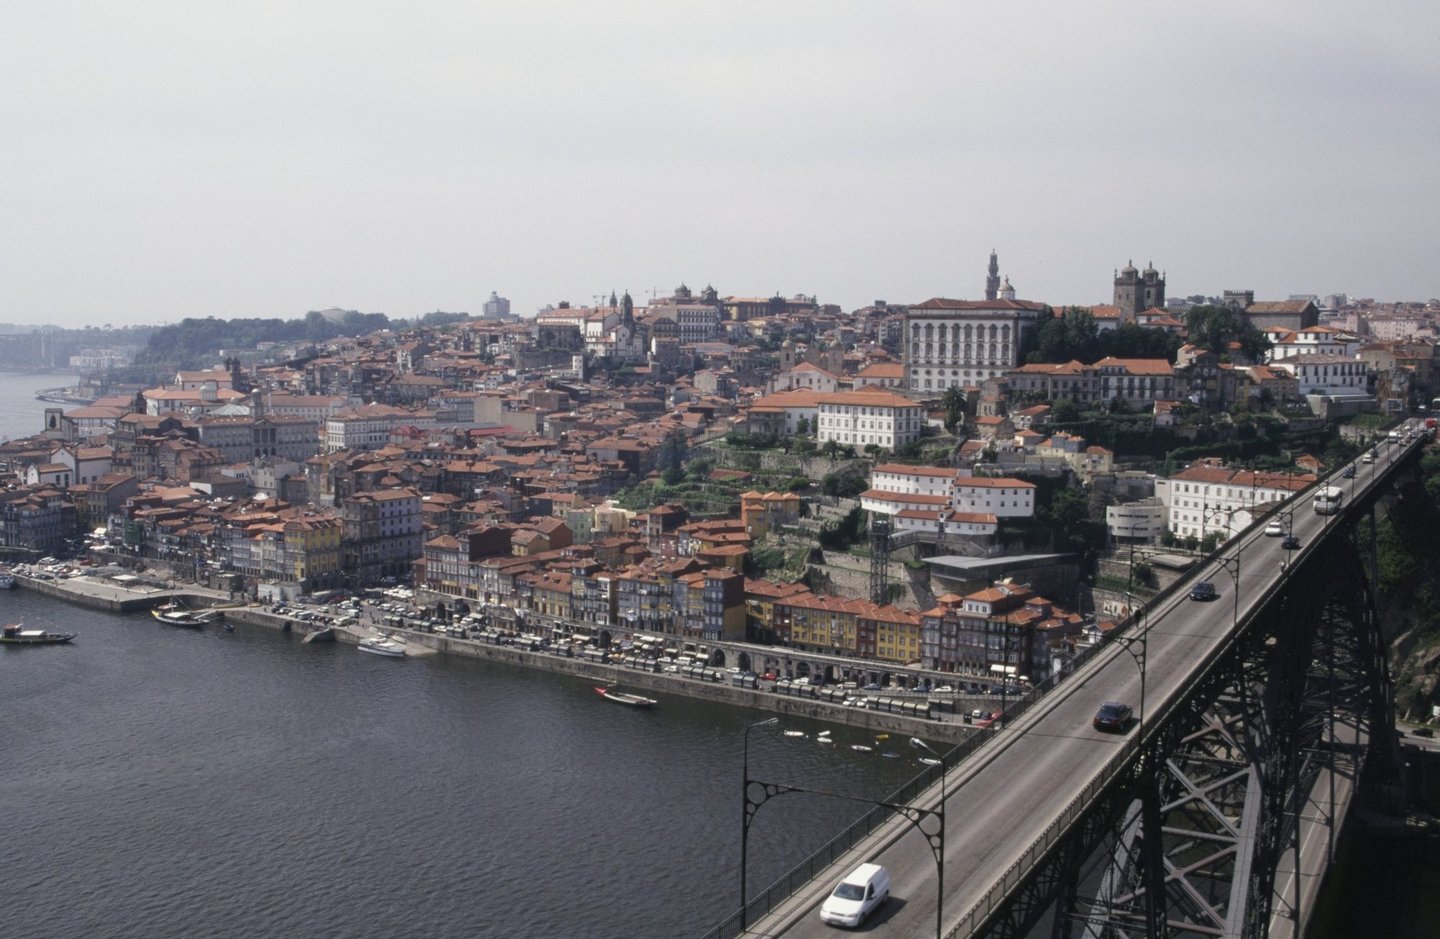 VILA NOVA DE GAIA, PORTUGAL - 2003: Portugal's historic city of Oporto is viewed from across the Douro River in this 2003 Vila Nova de Gaia, Portugal, photo. (Photo by George Rose/Getty Images)